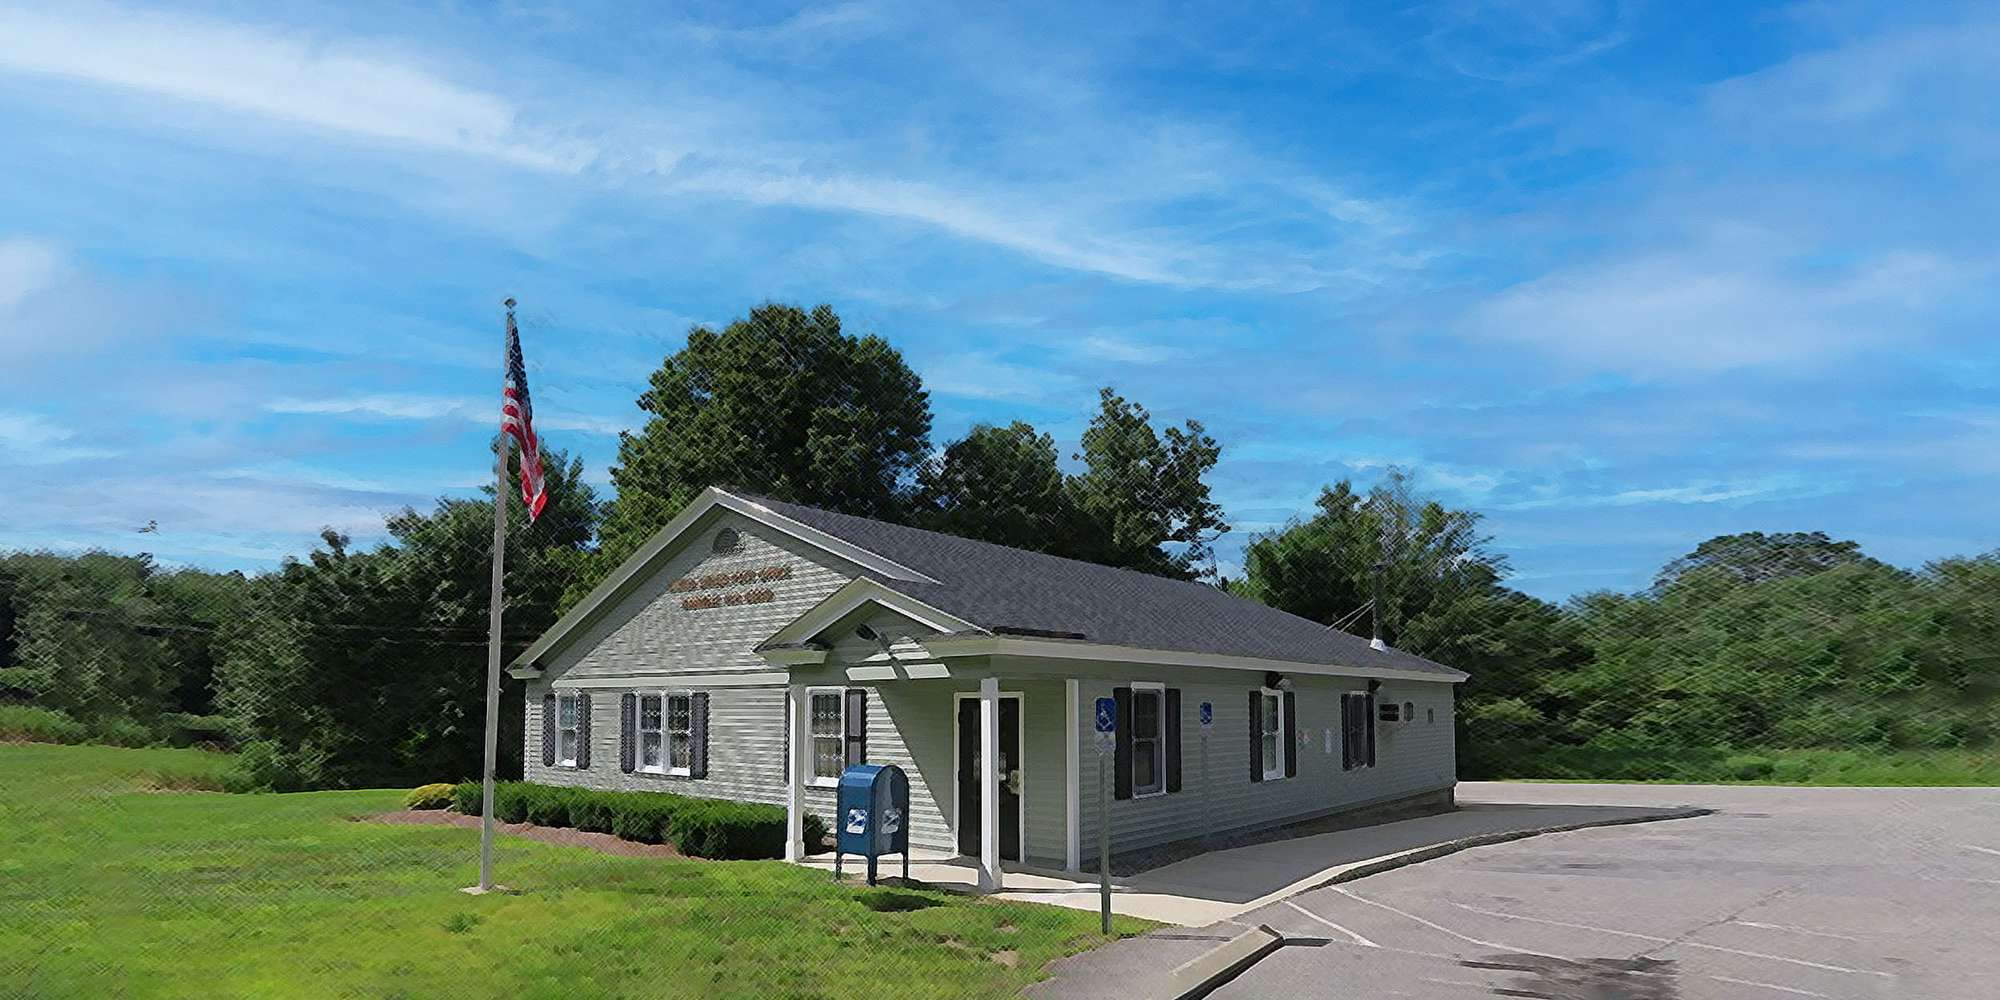 Photo of the Post Office in Danville, New Hampshire